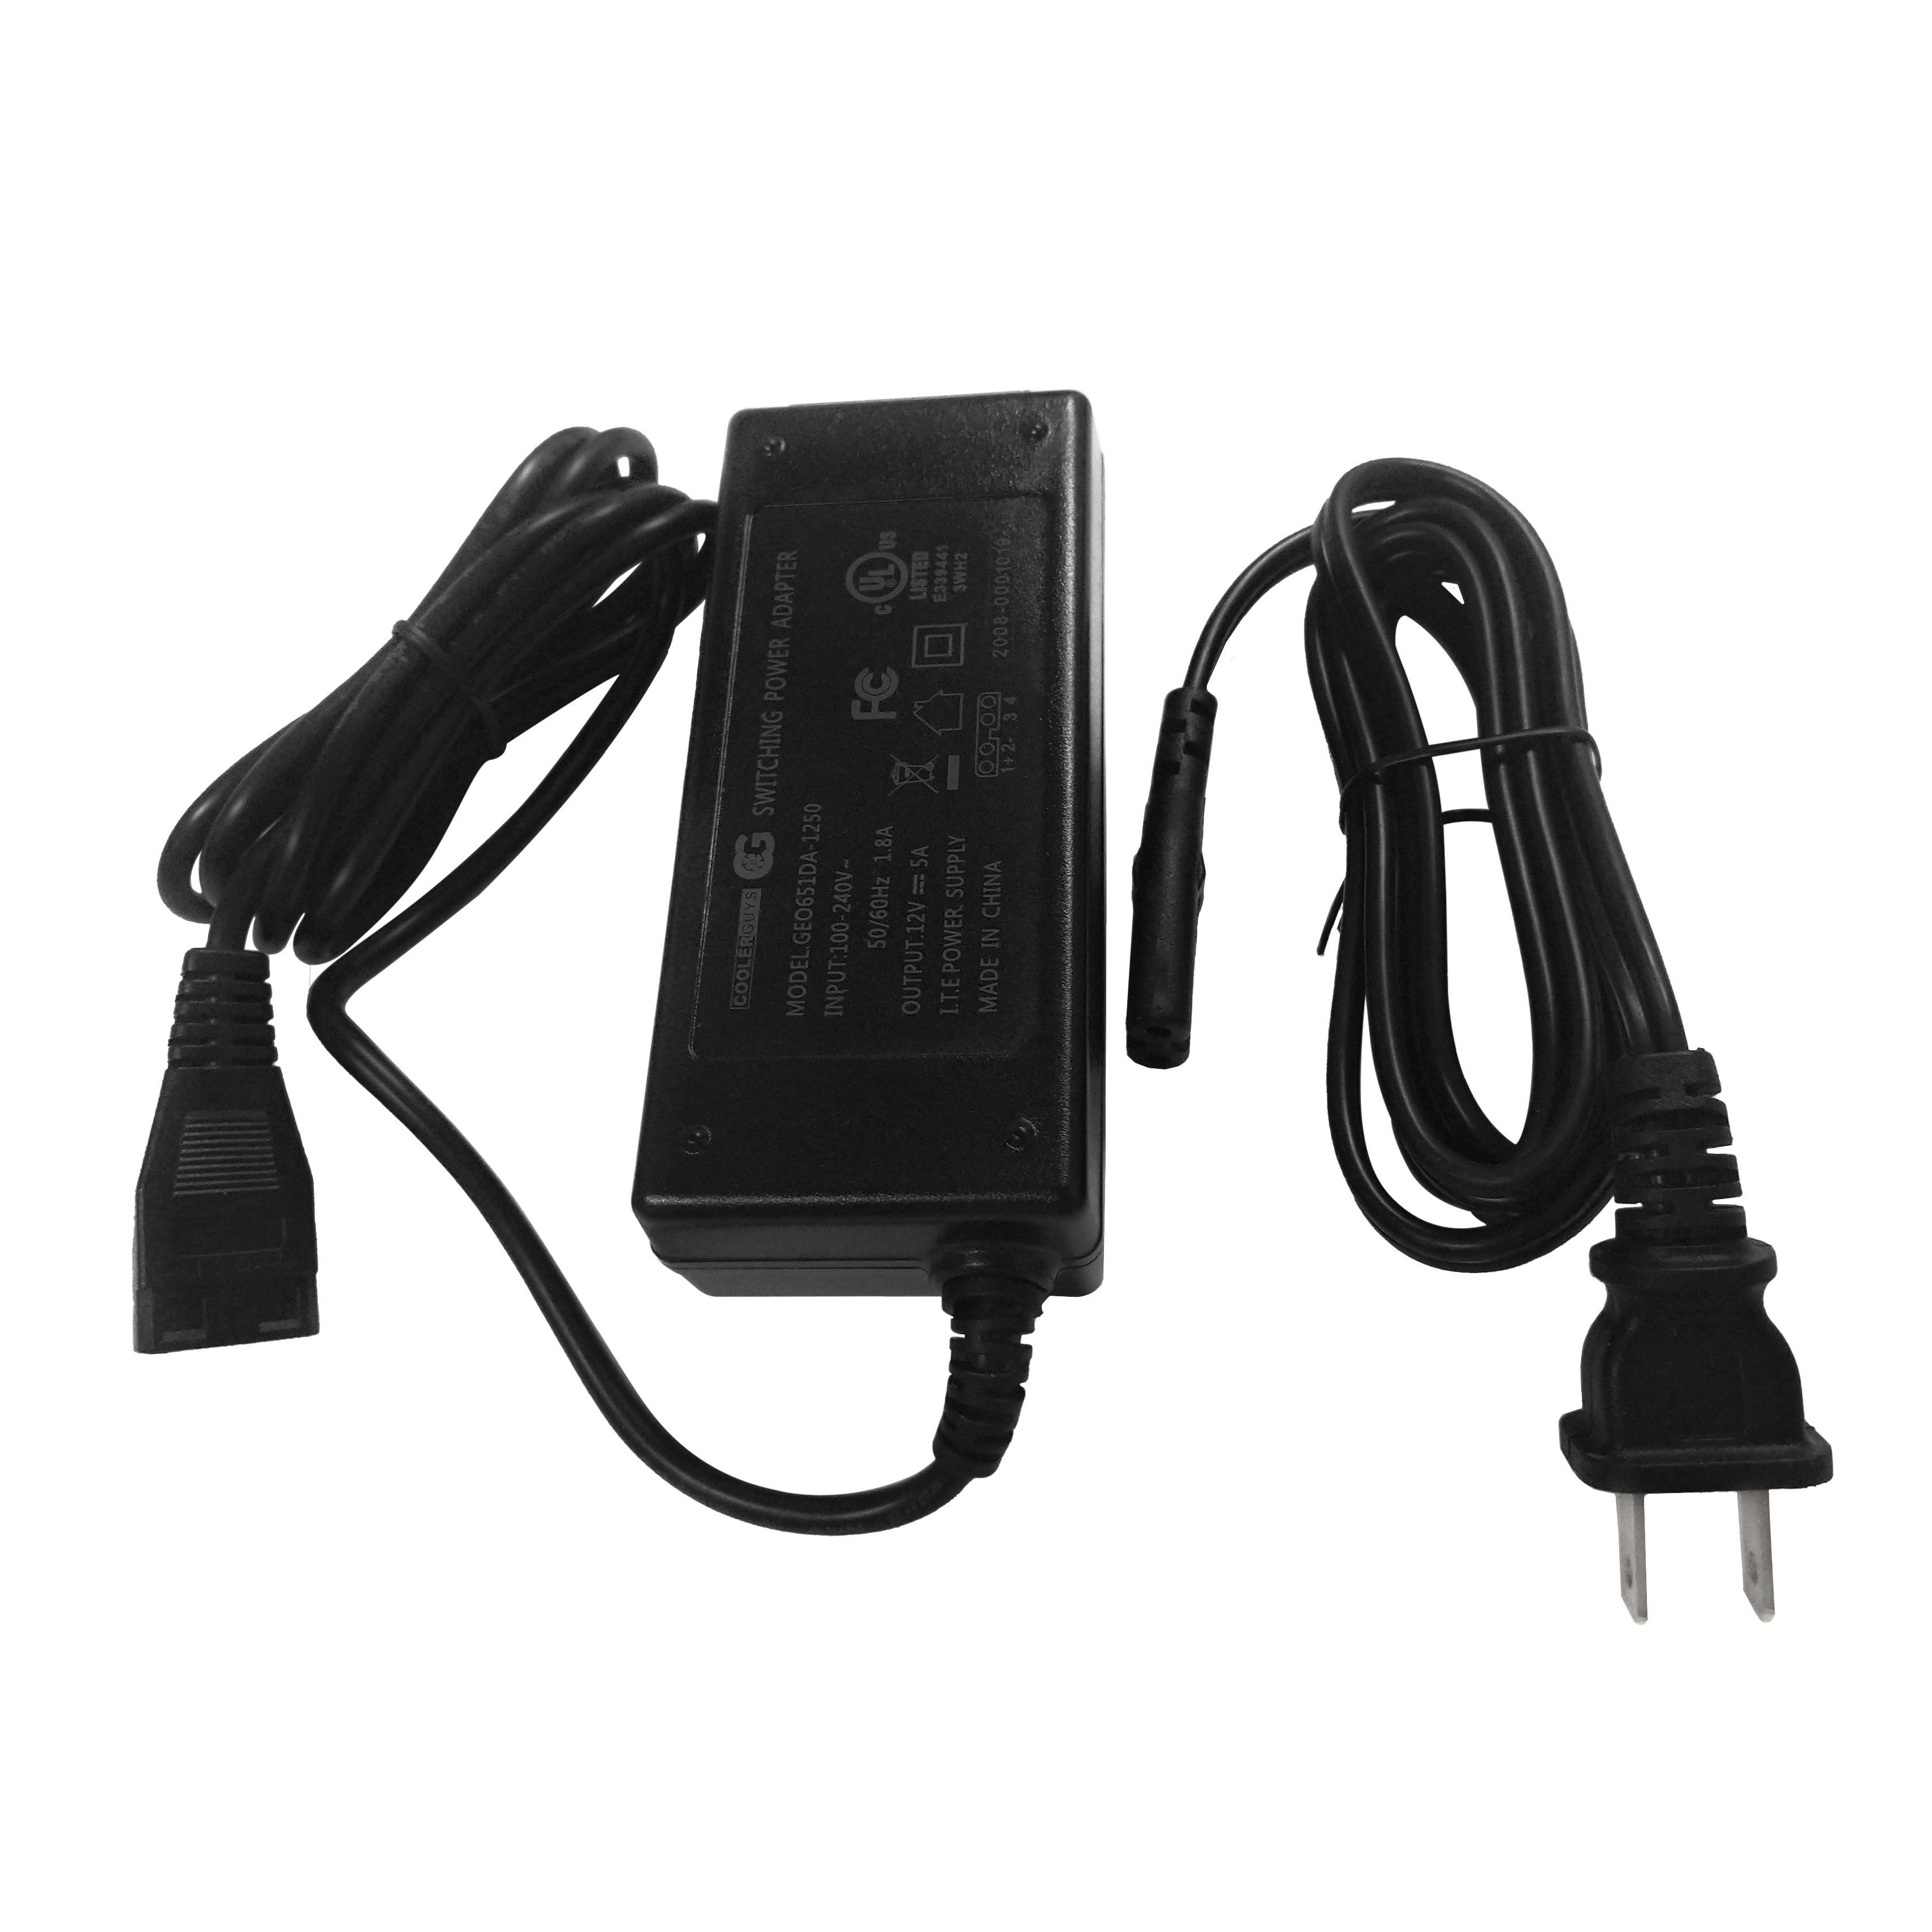 to 12V Power Adapter | Find Yours at